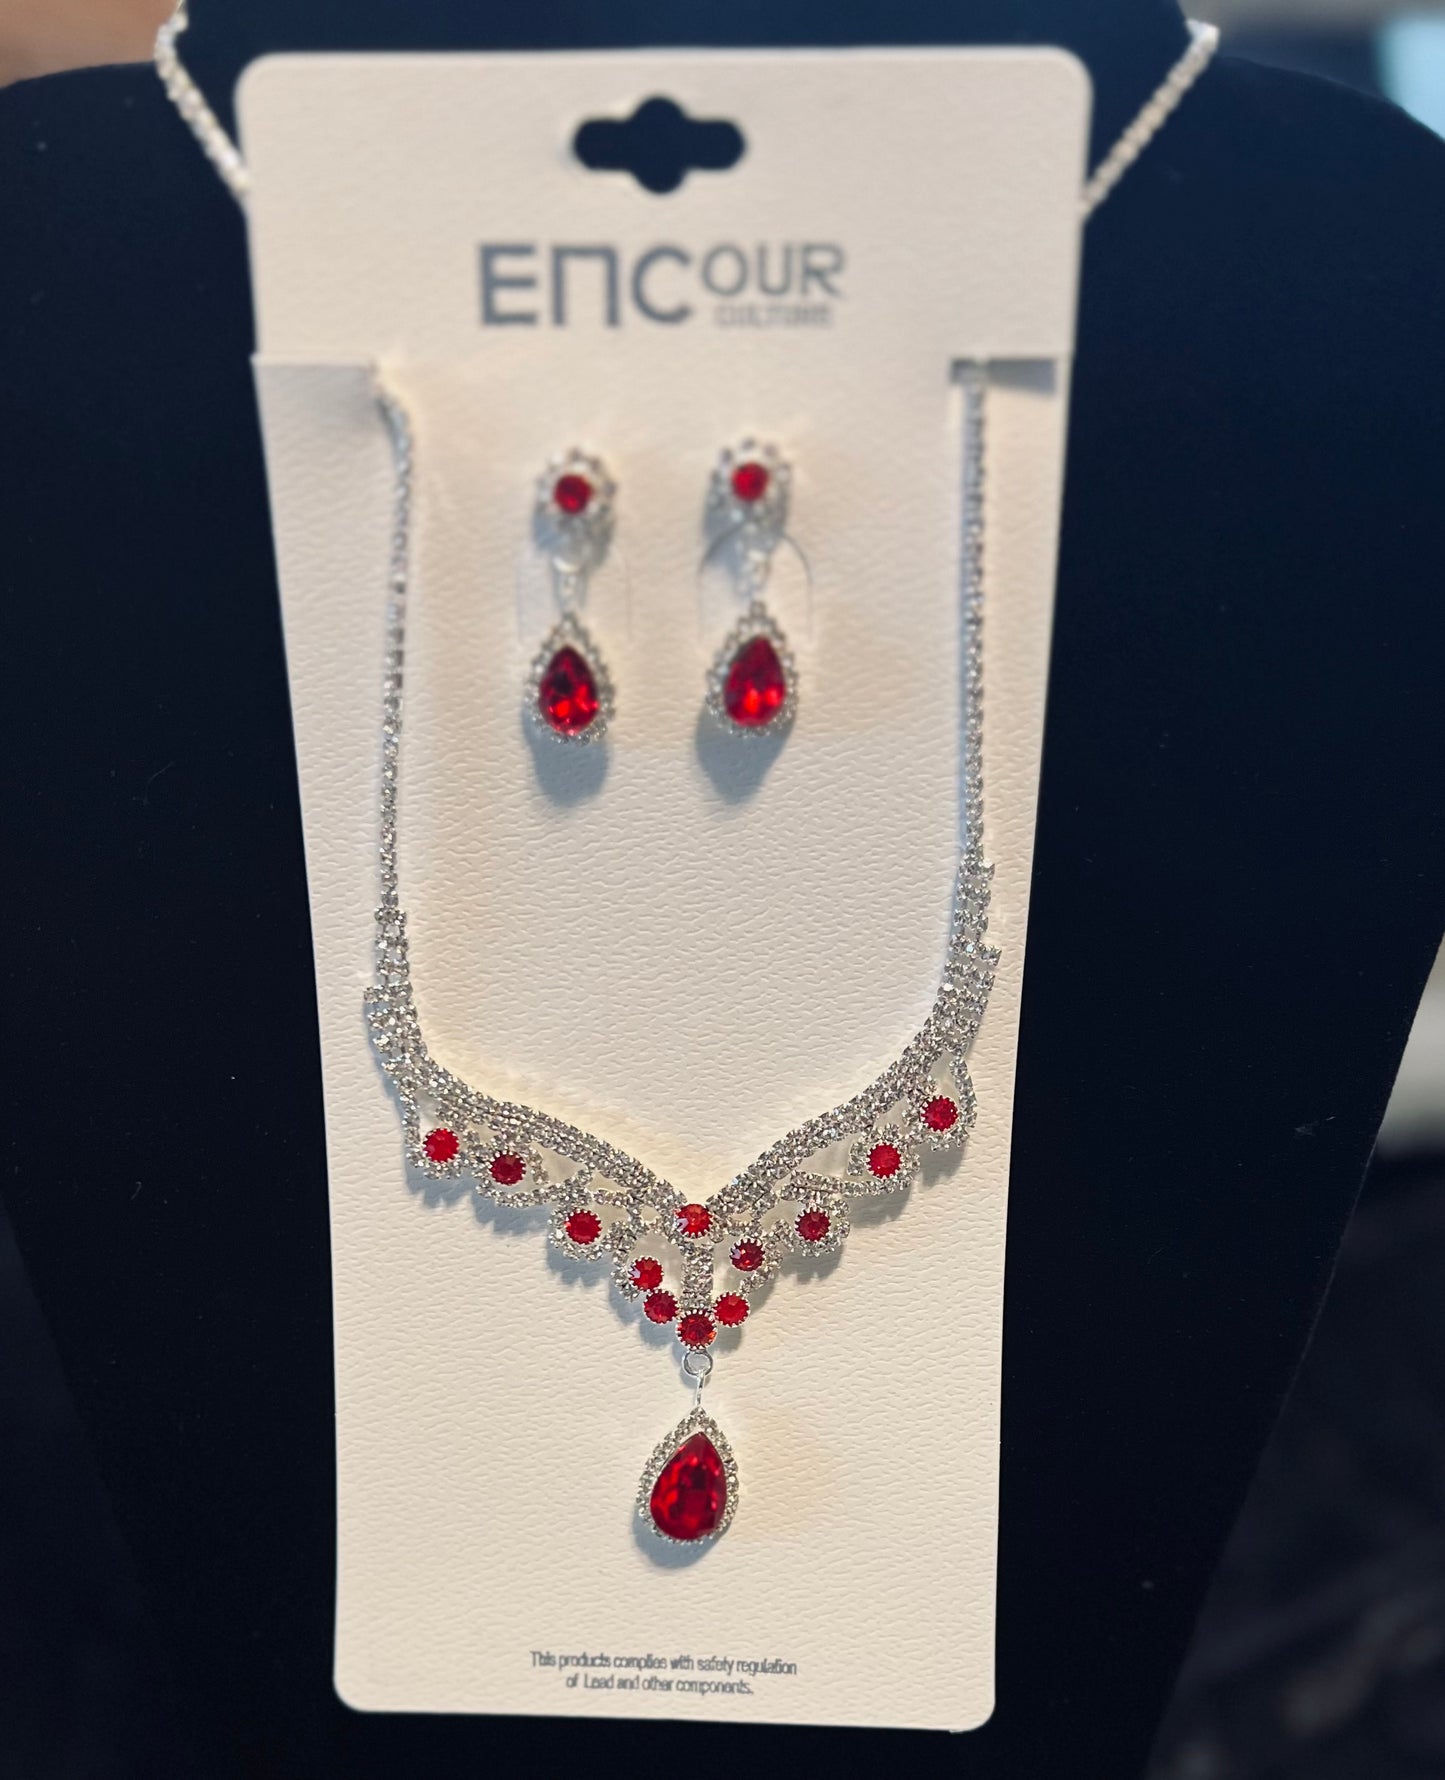 Rubies and Crystals studded necklace with Earrings Cedar Hill Country Market